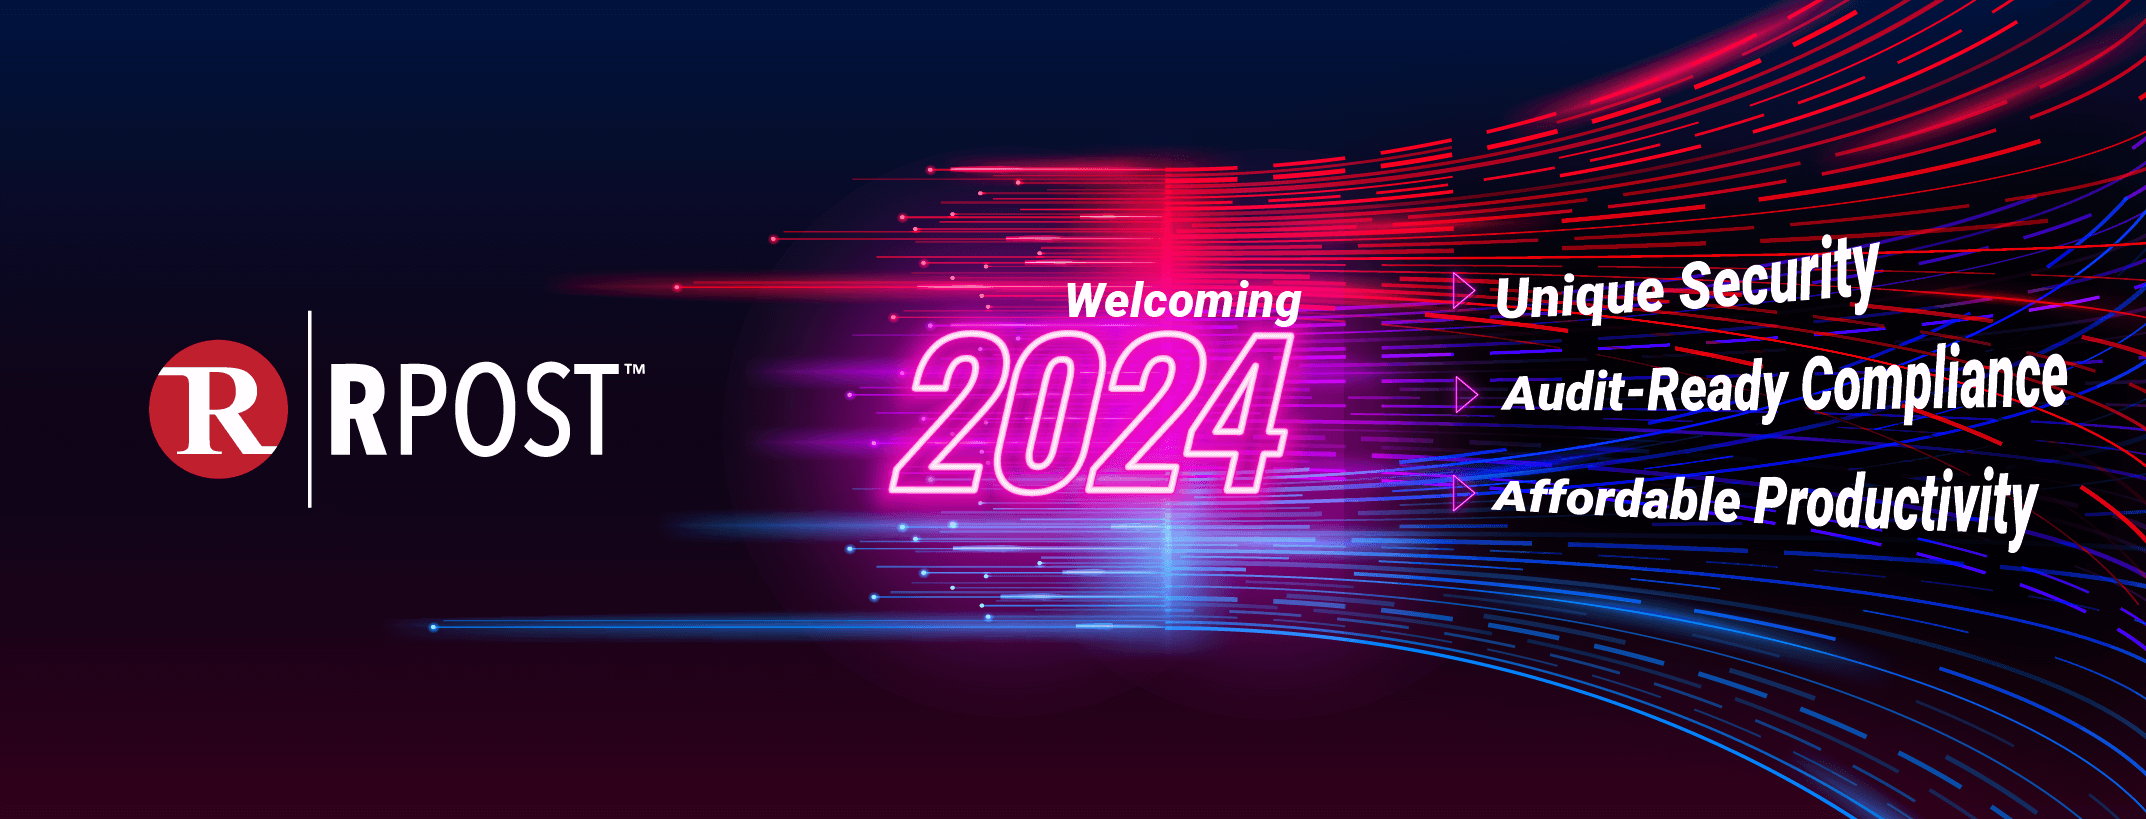 welcoming-2024-after-celebrating-a-year-of-innovation-at-rpost